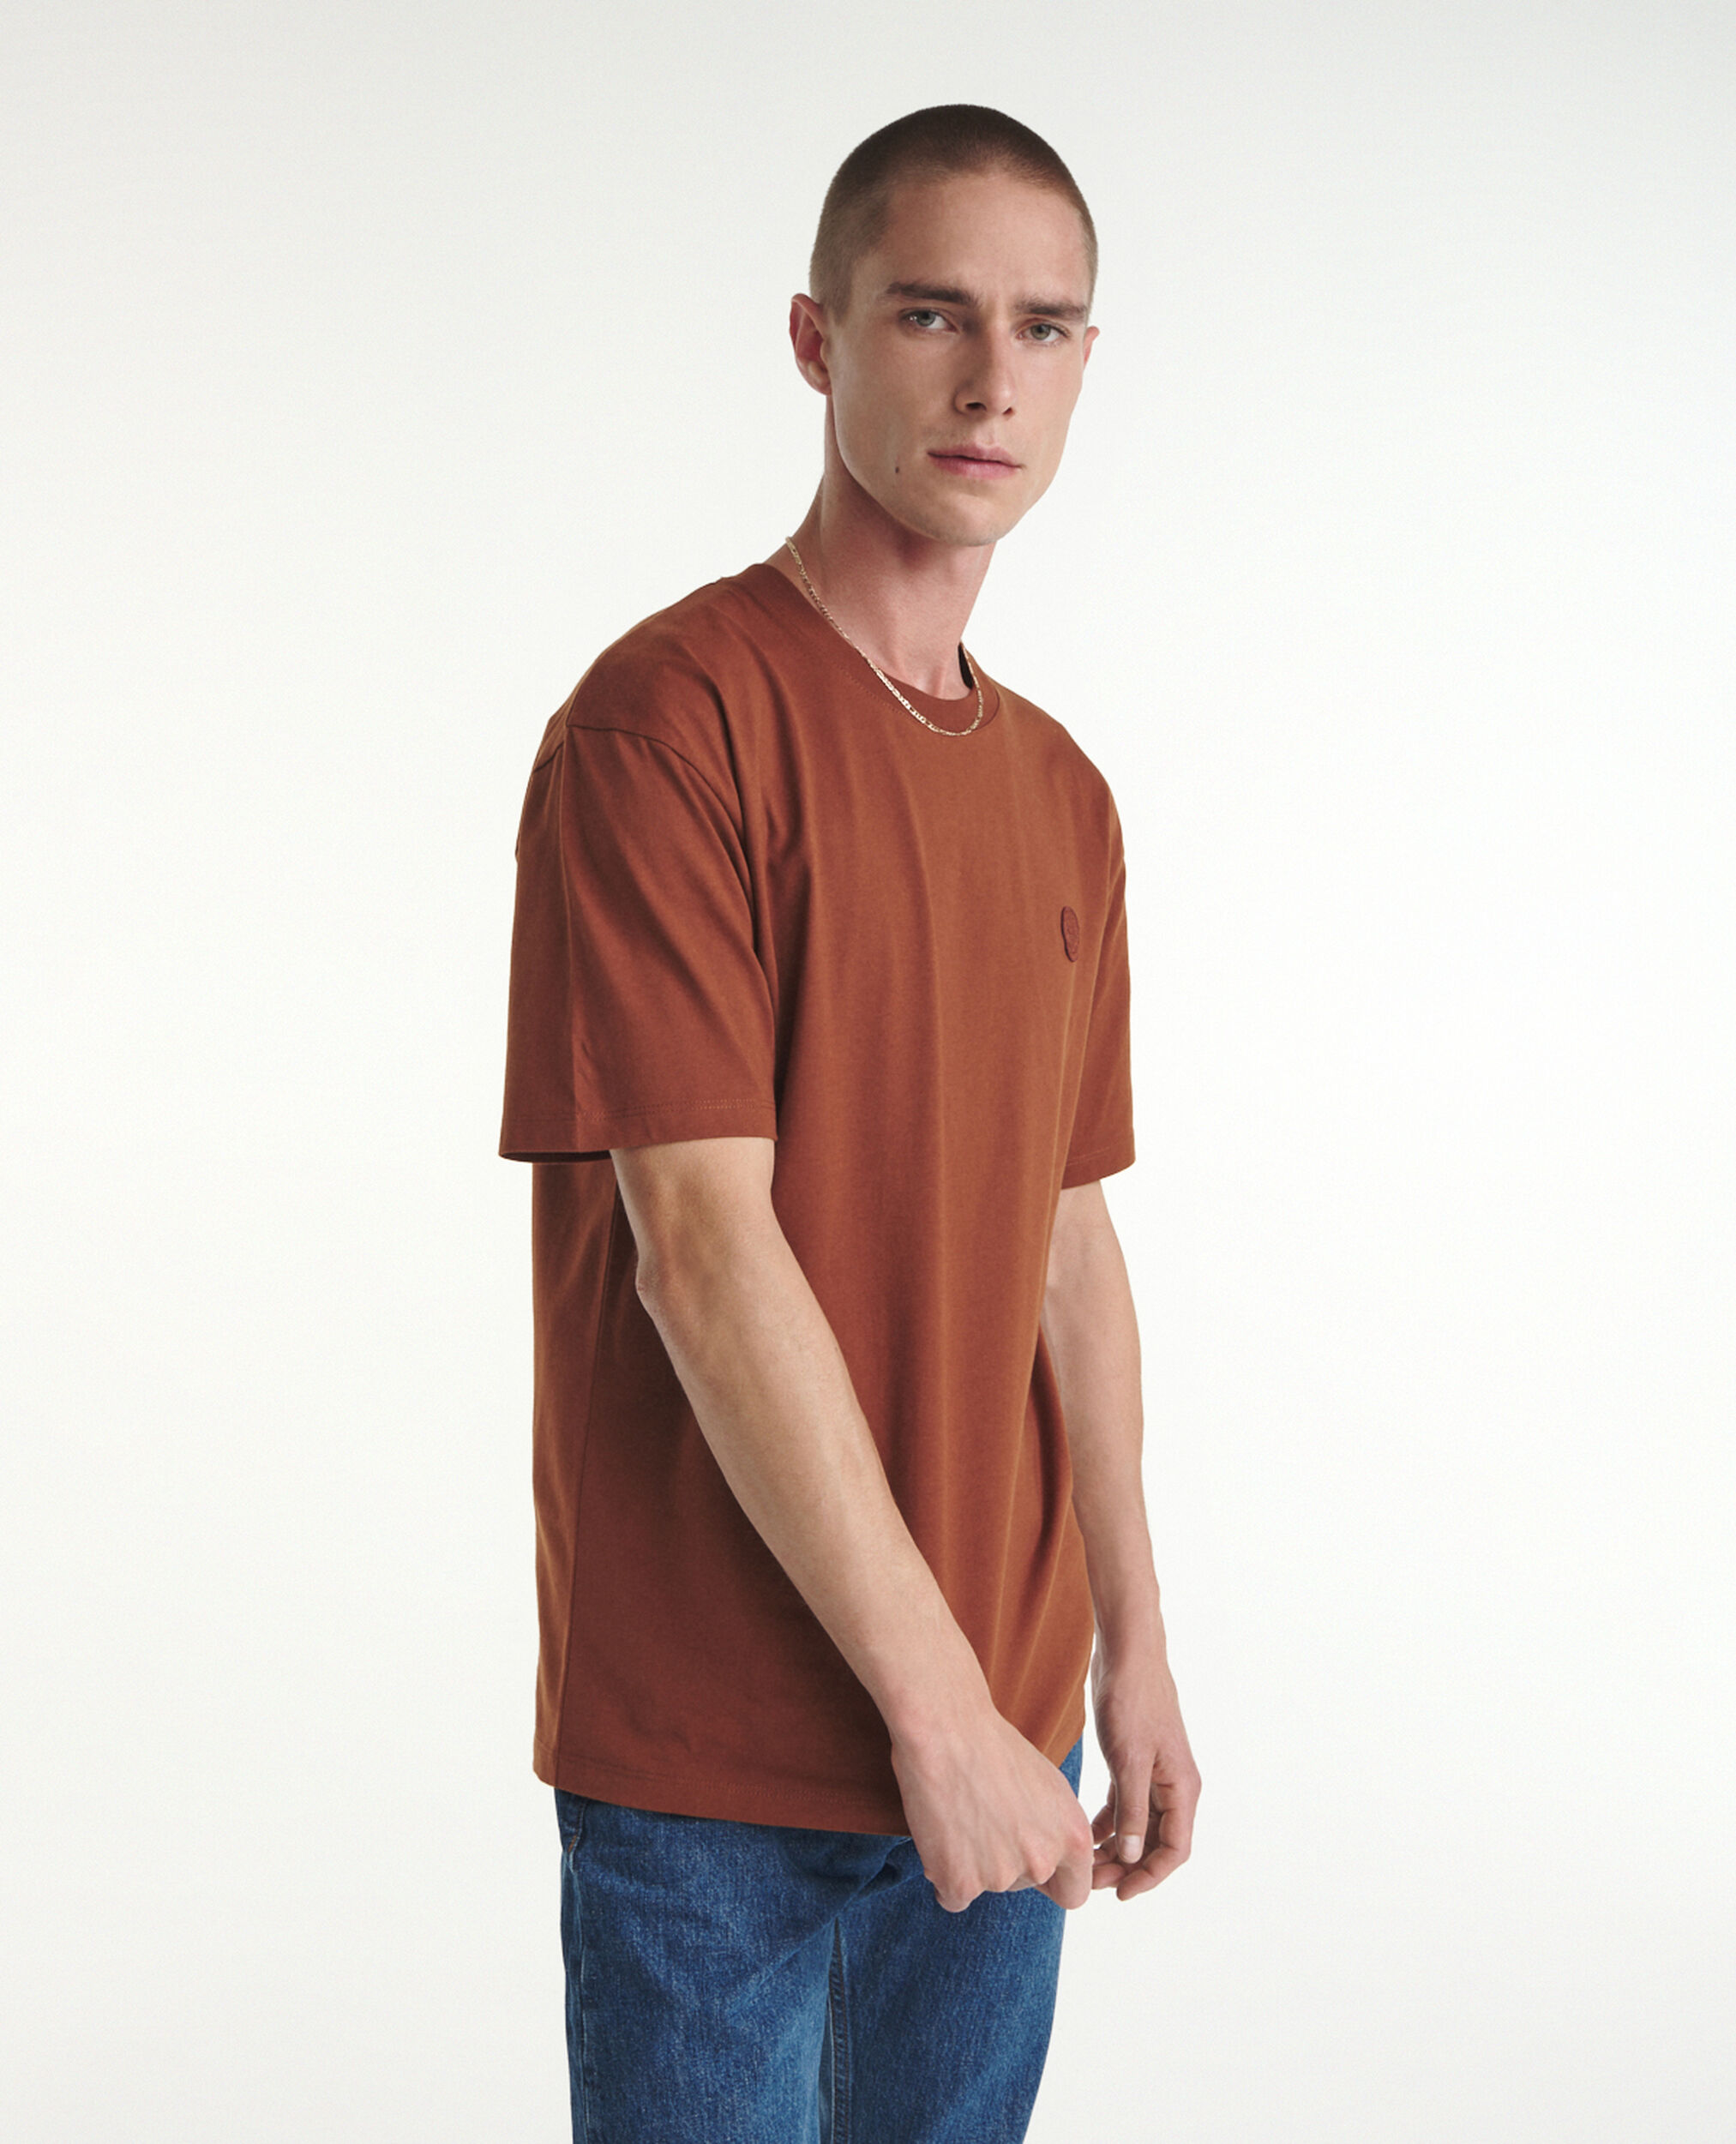 Orange-red T-shirt in cotton, ROUILLE, hi-res image number null